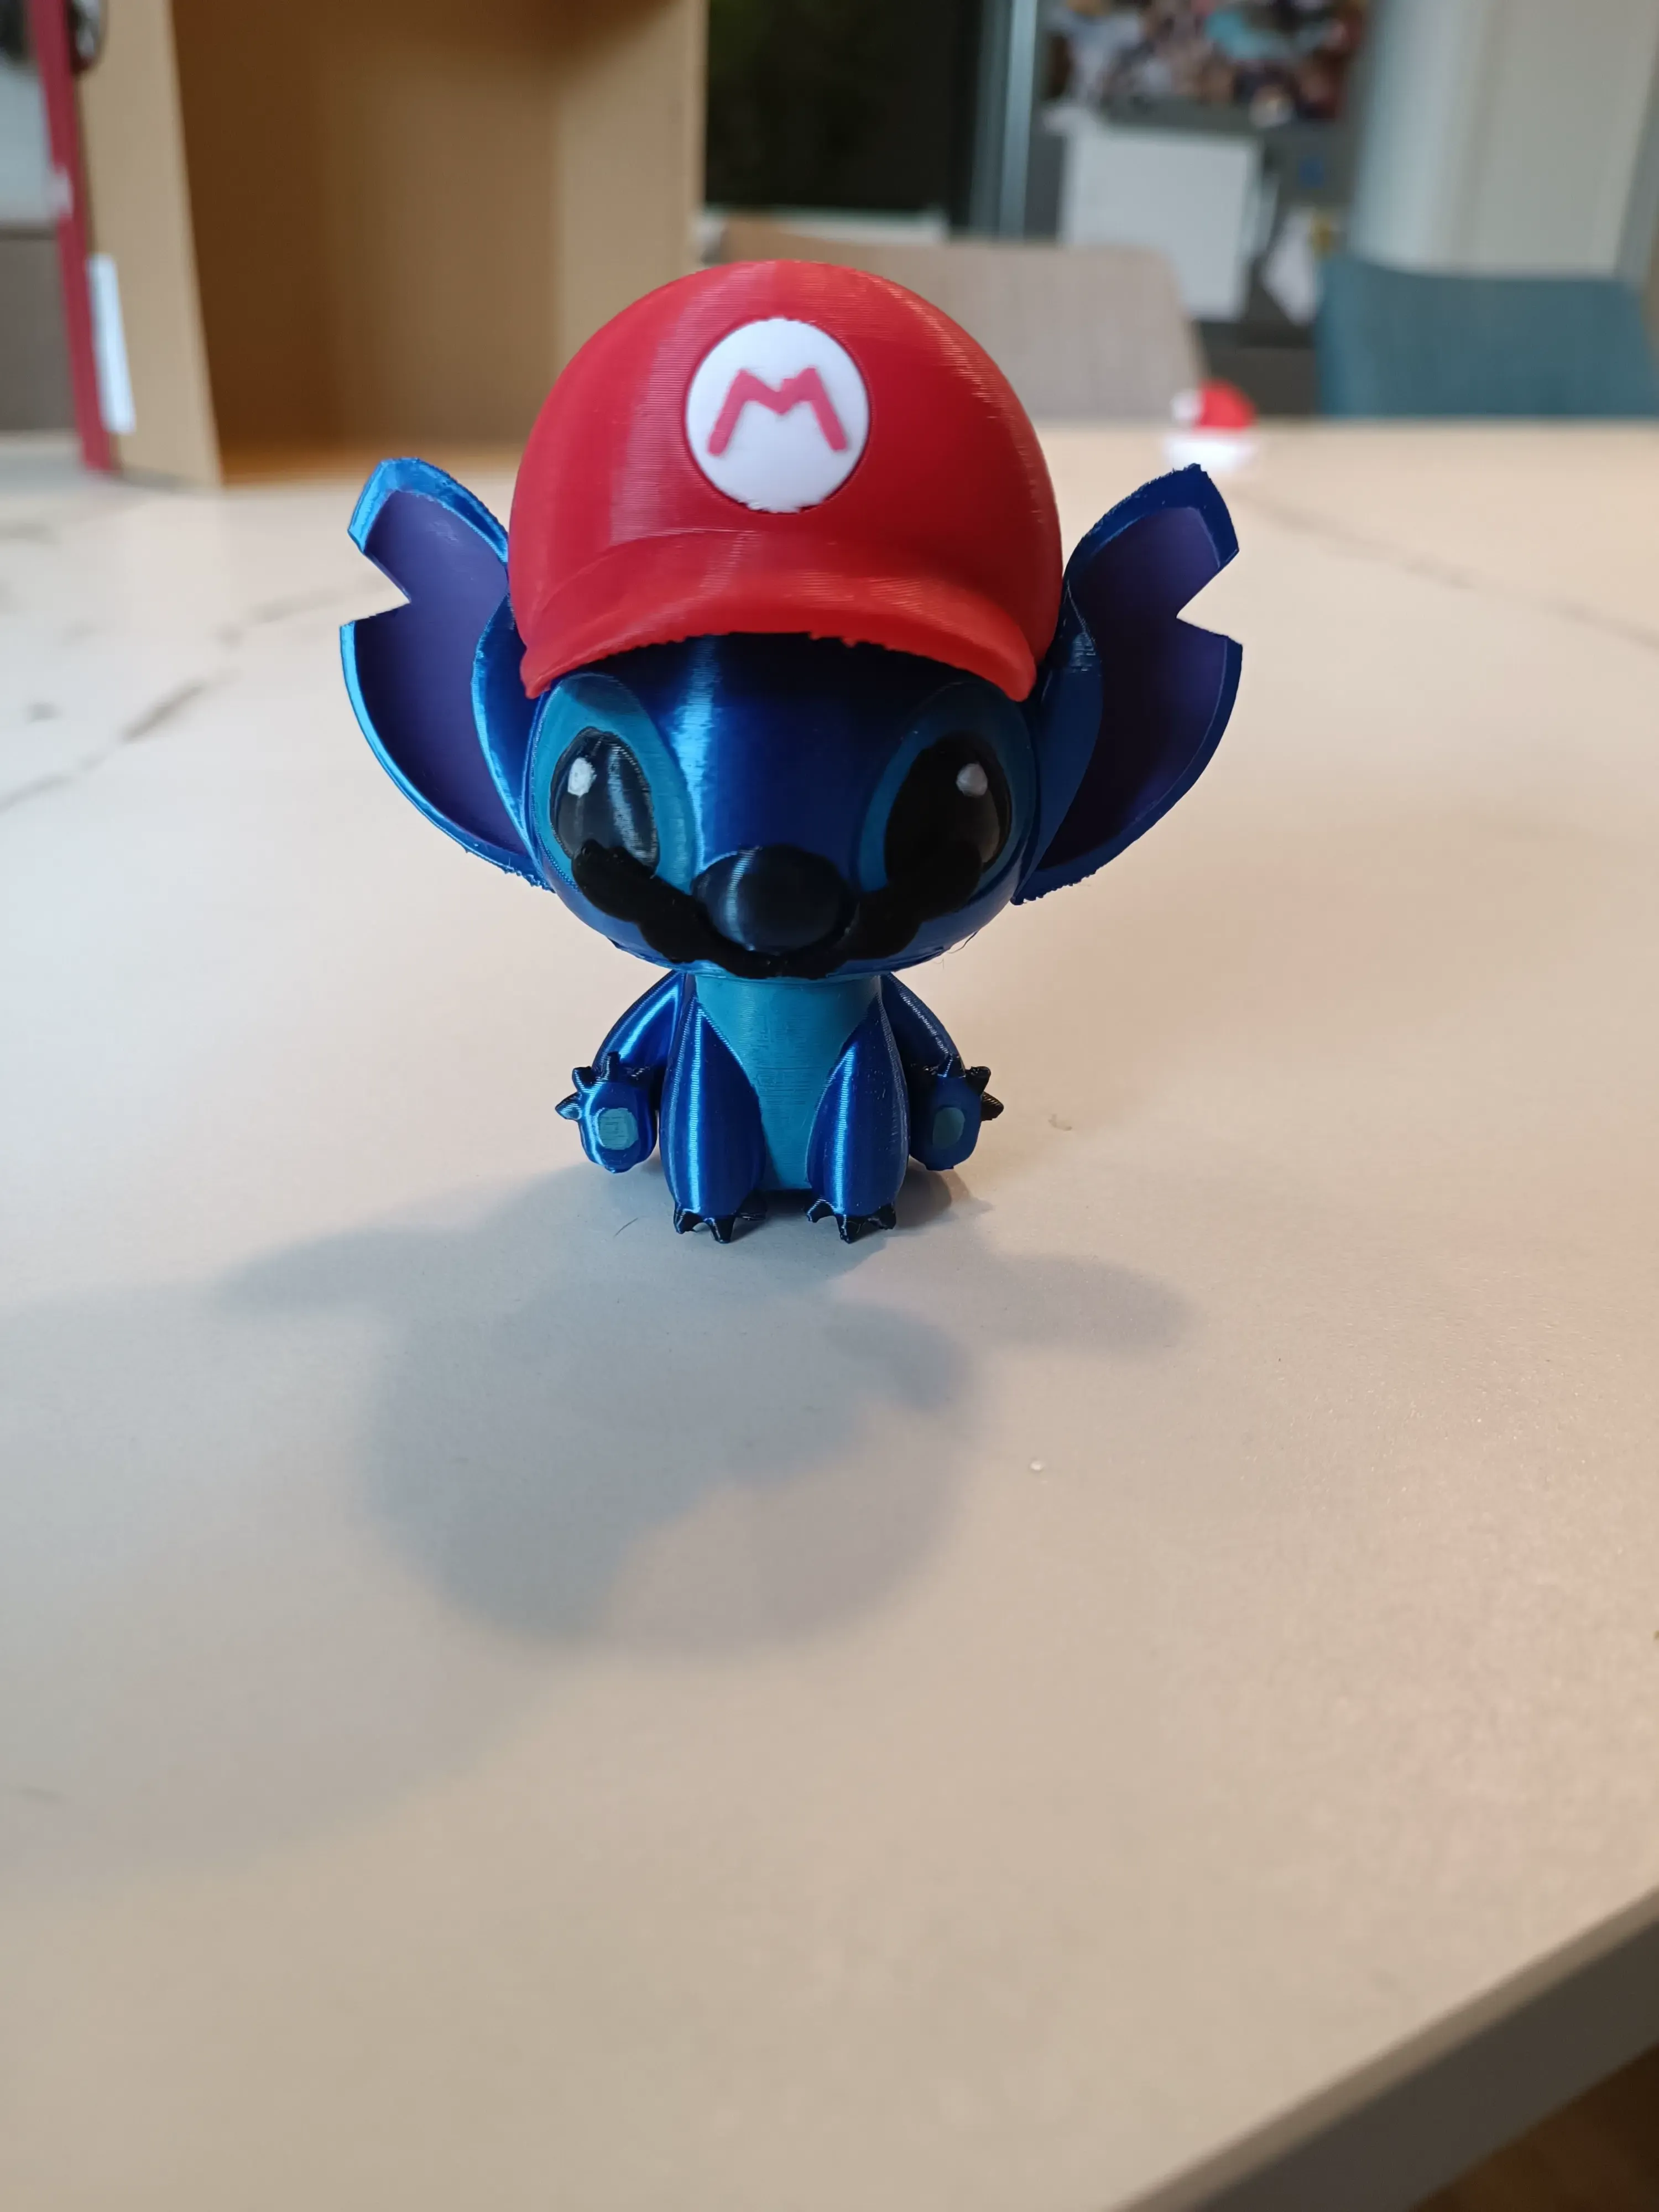 STITCH DISGUISED AS MARIO